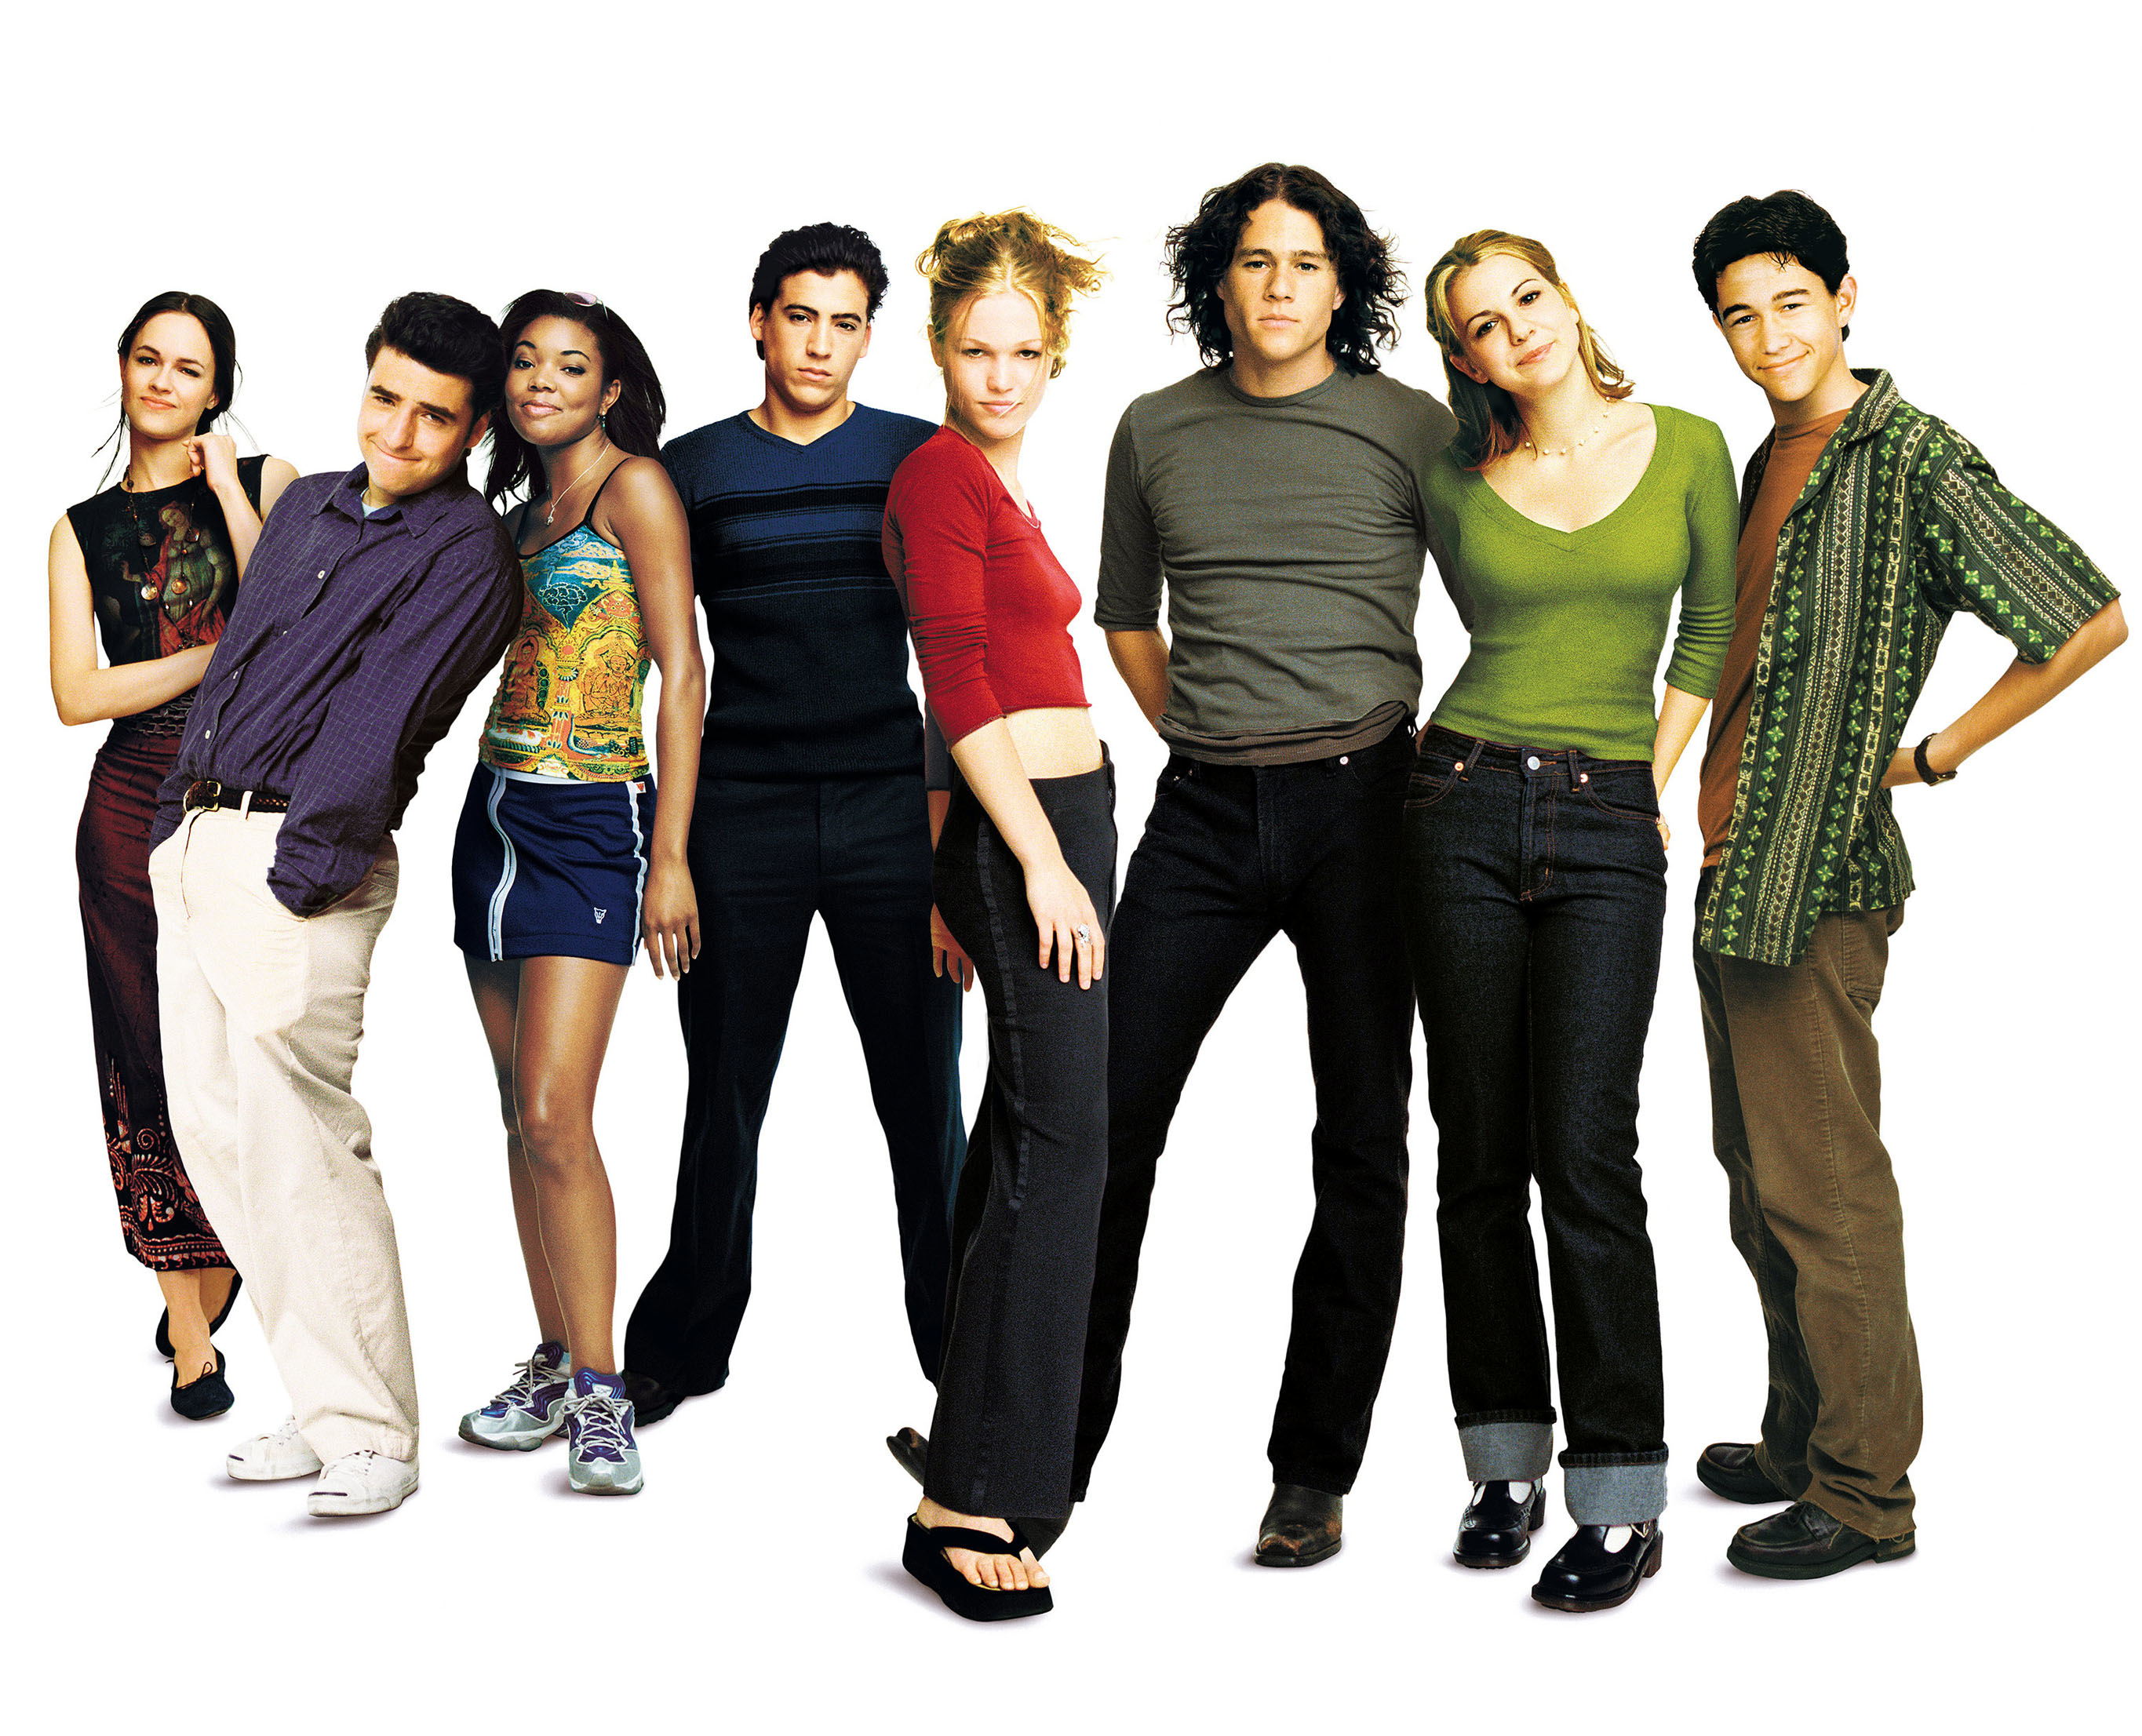 The cast of the movie standing and posing together